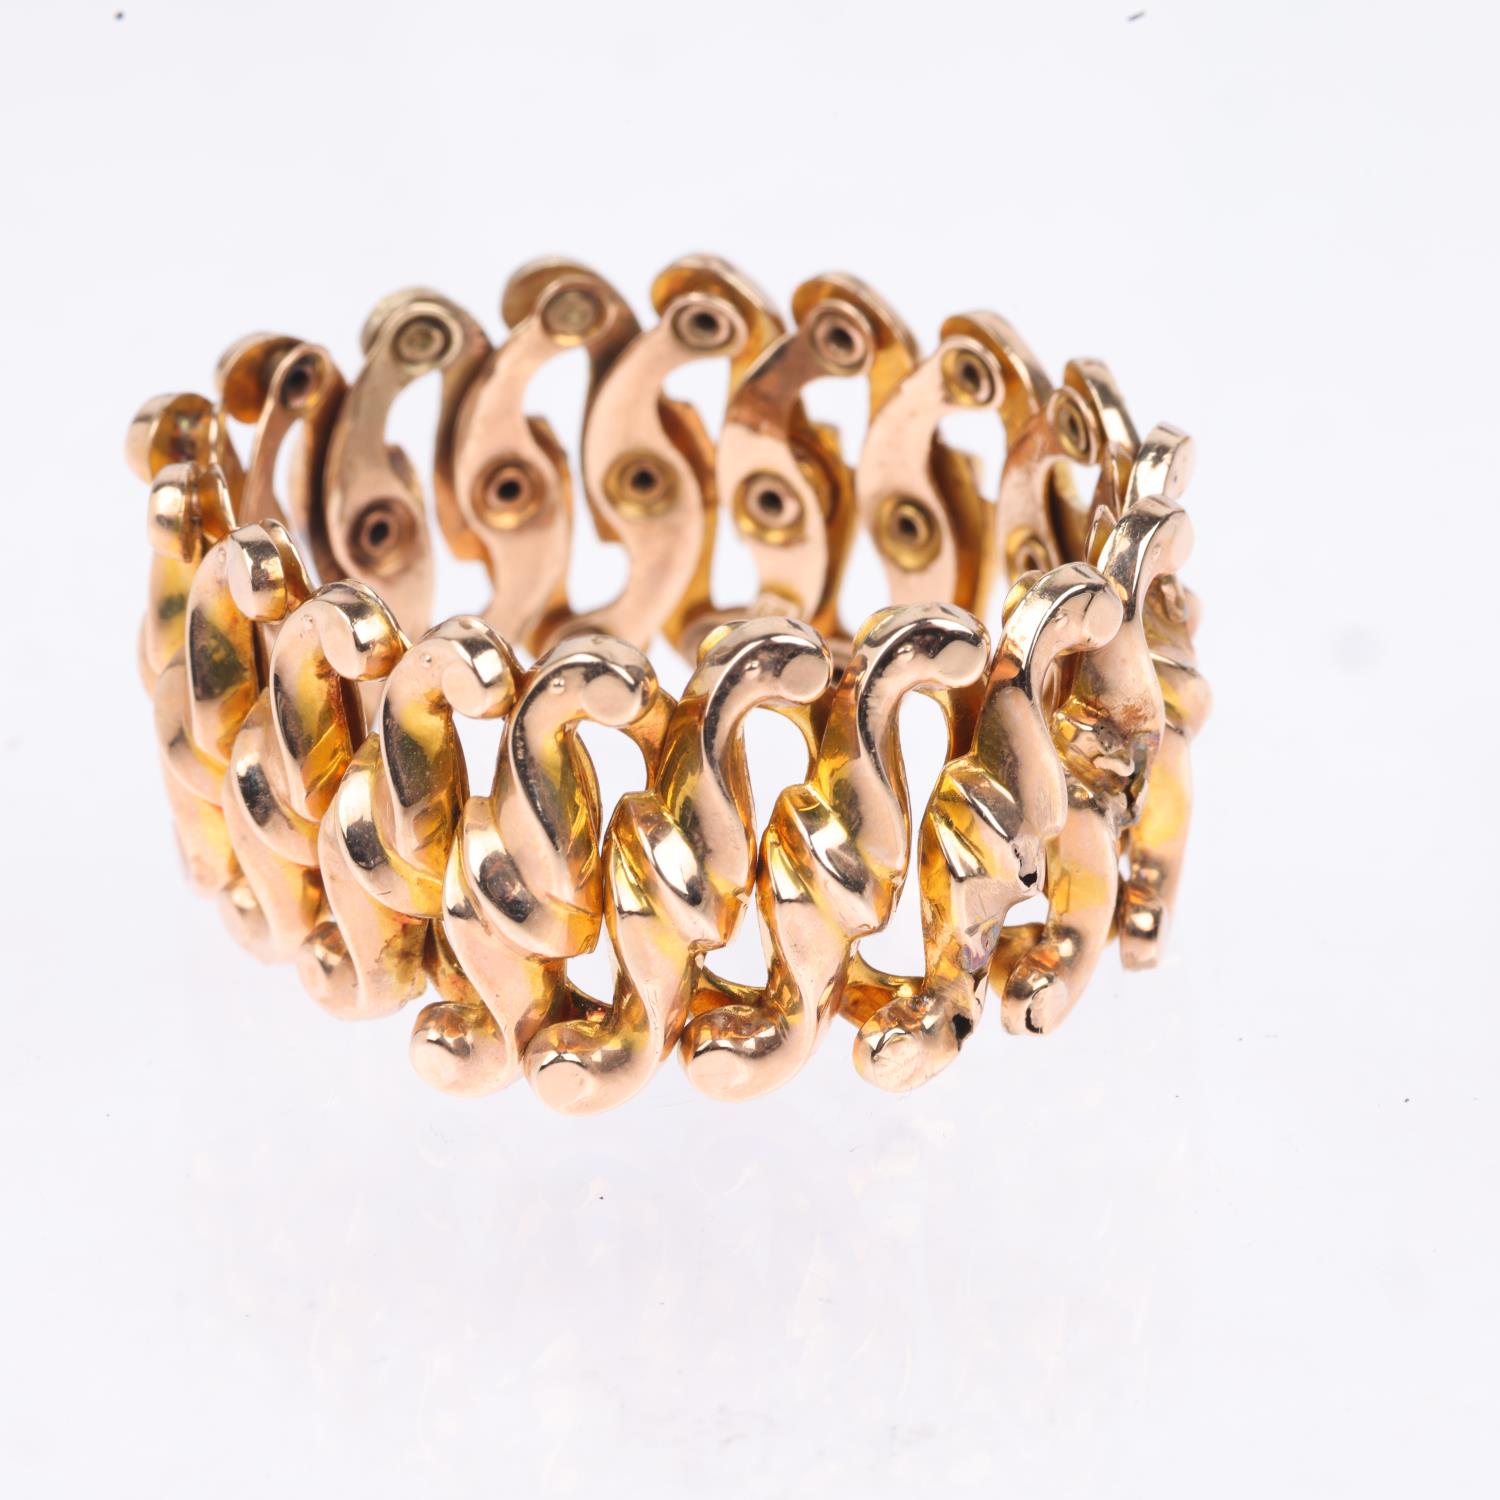 A Victorian 9ct gold expanding bracelet, band width 17.5mm, internal circumference 10 - 25cm, 11g - Image 2 of 4